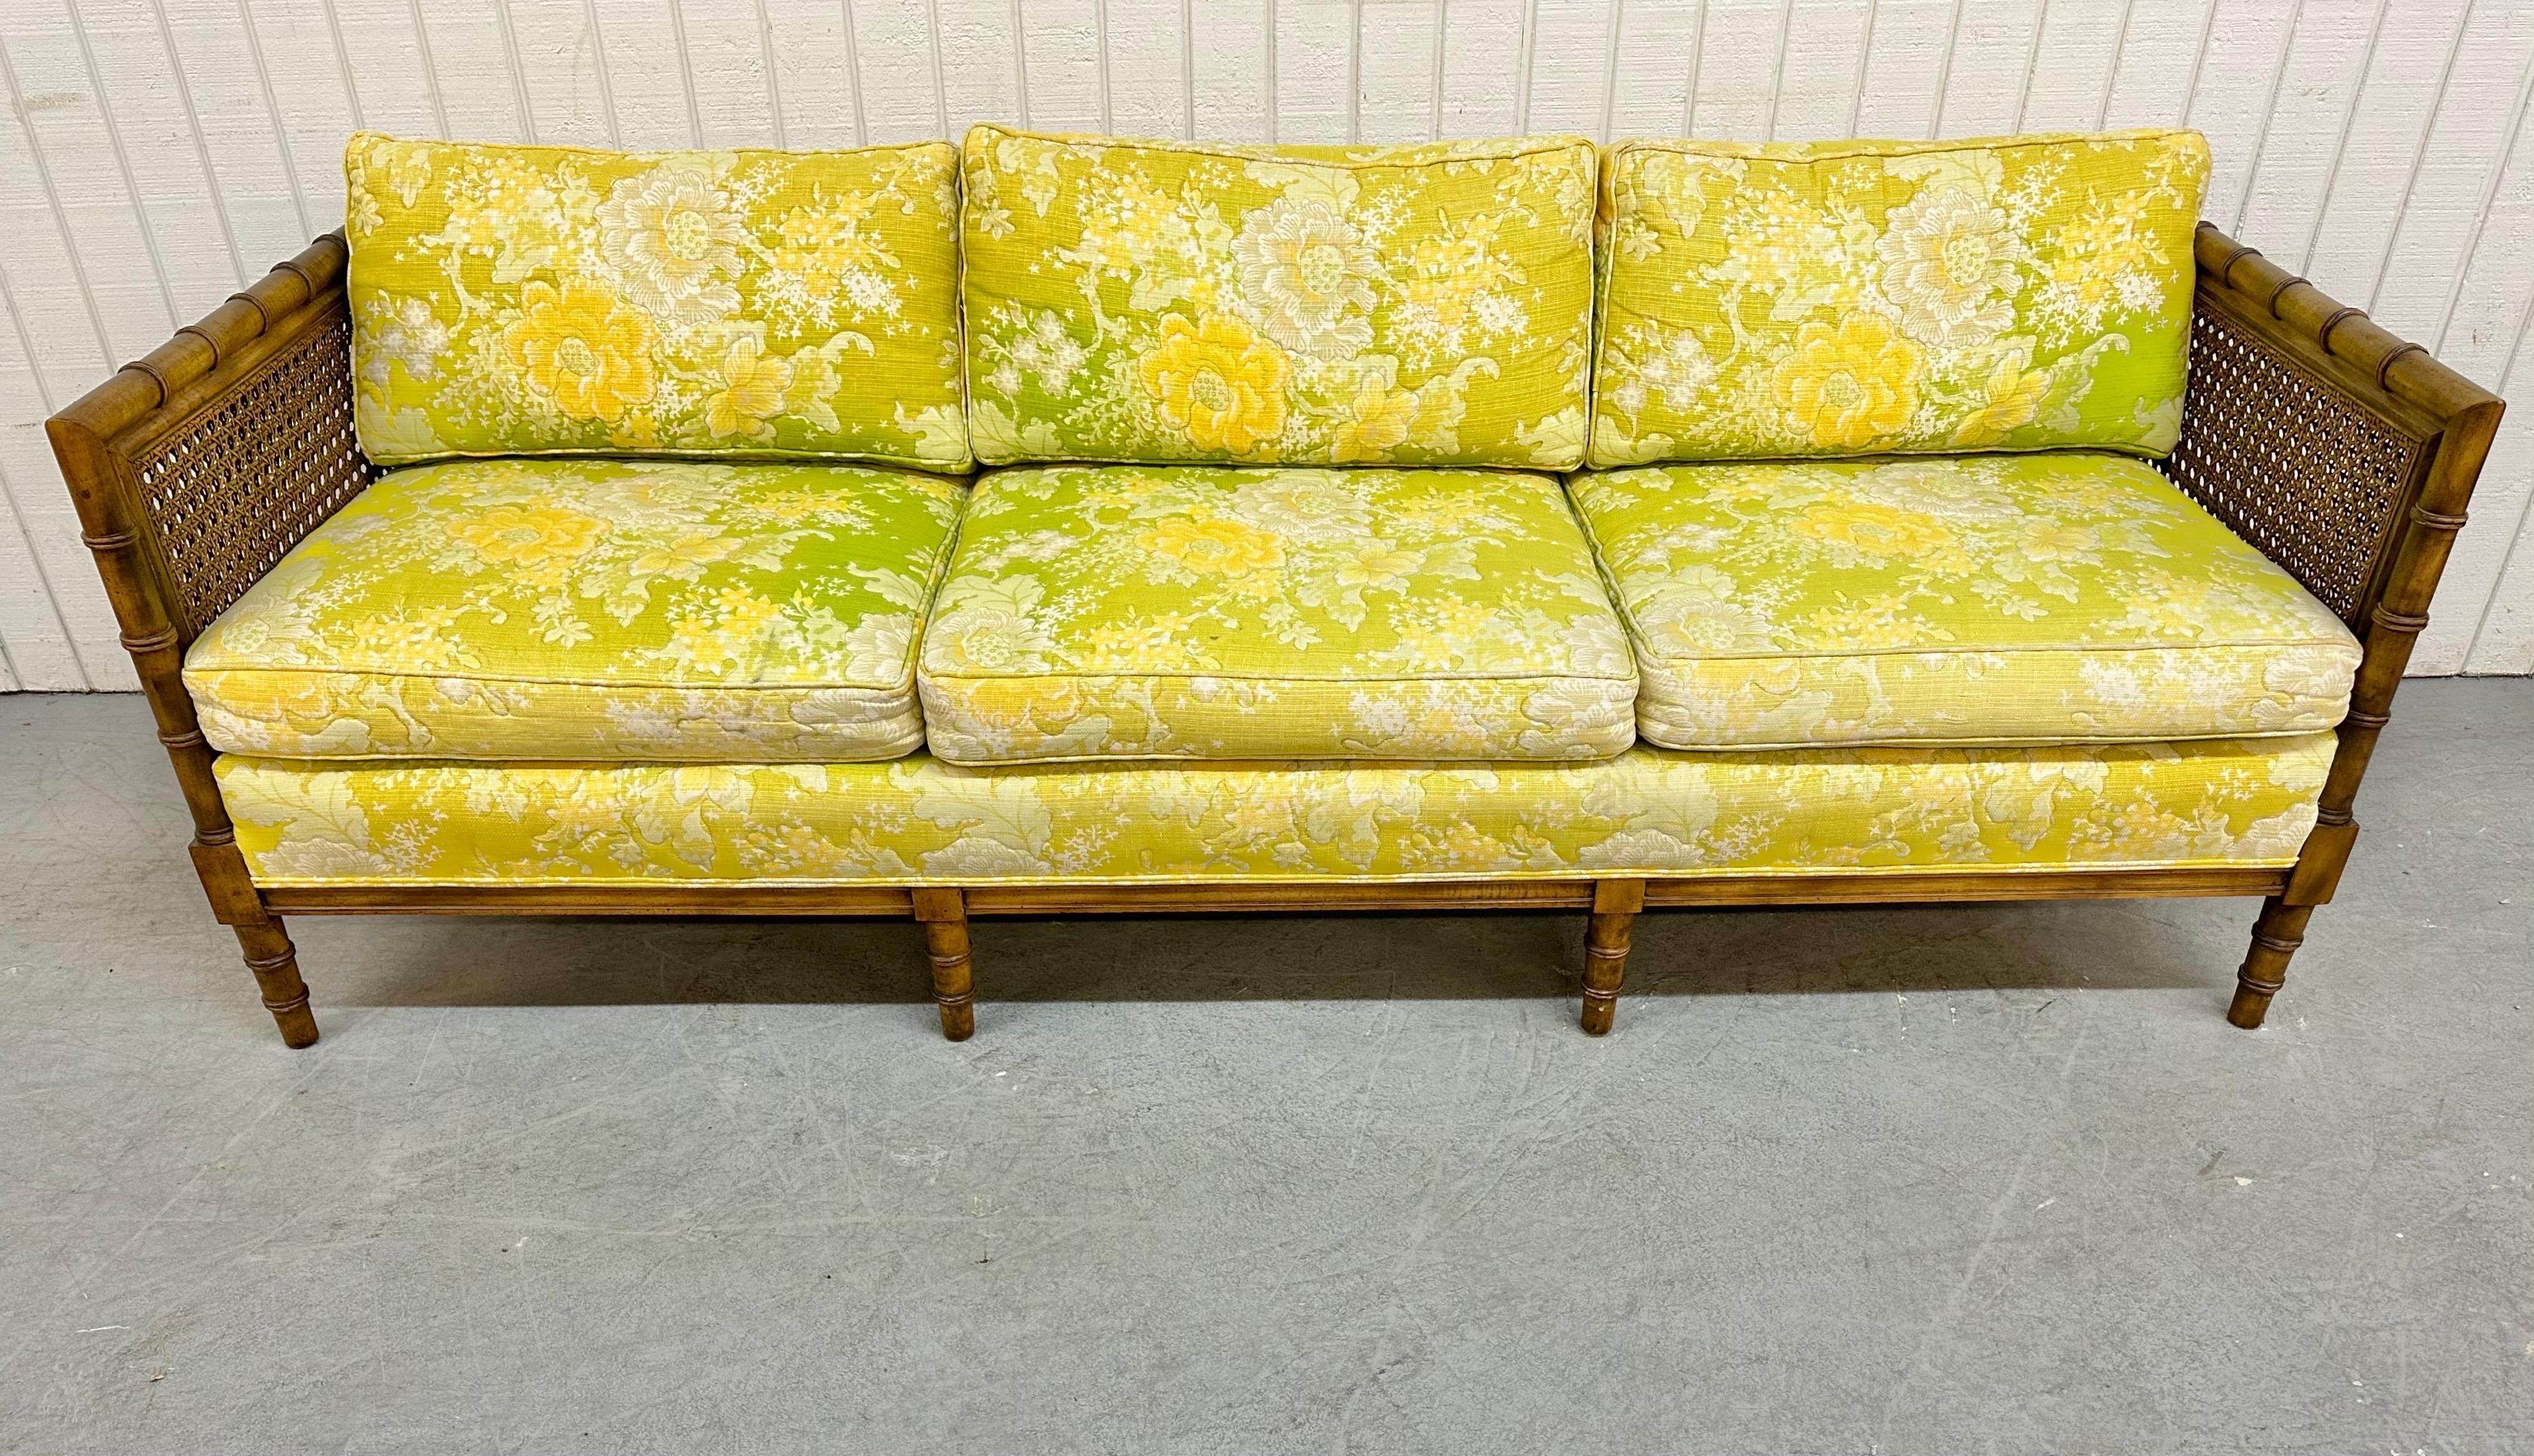 This listing is for a vintage Bamboo Floral Cane Sofa. Featuring a beautiful bright greenish yellow floral upholstery, bamboo style frame, canned arm rests, and a walnut colored frame.